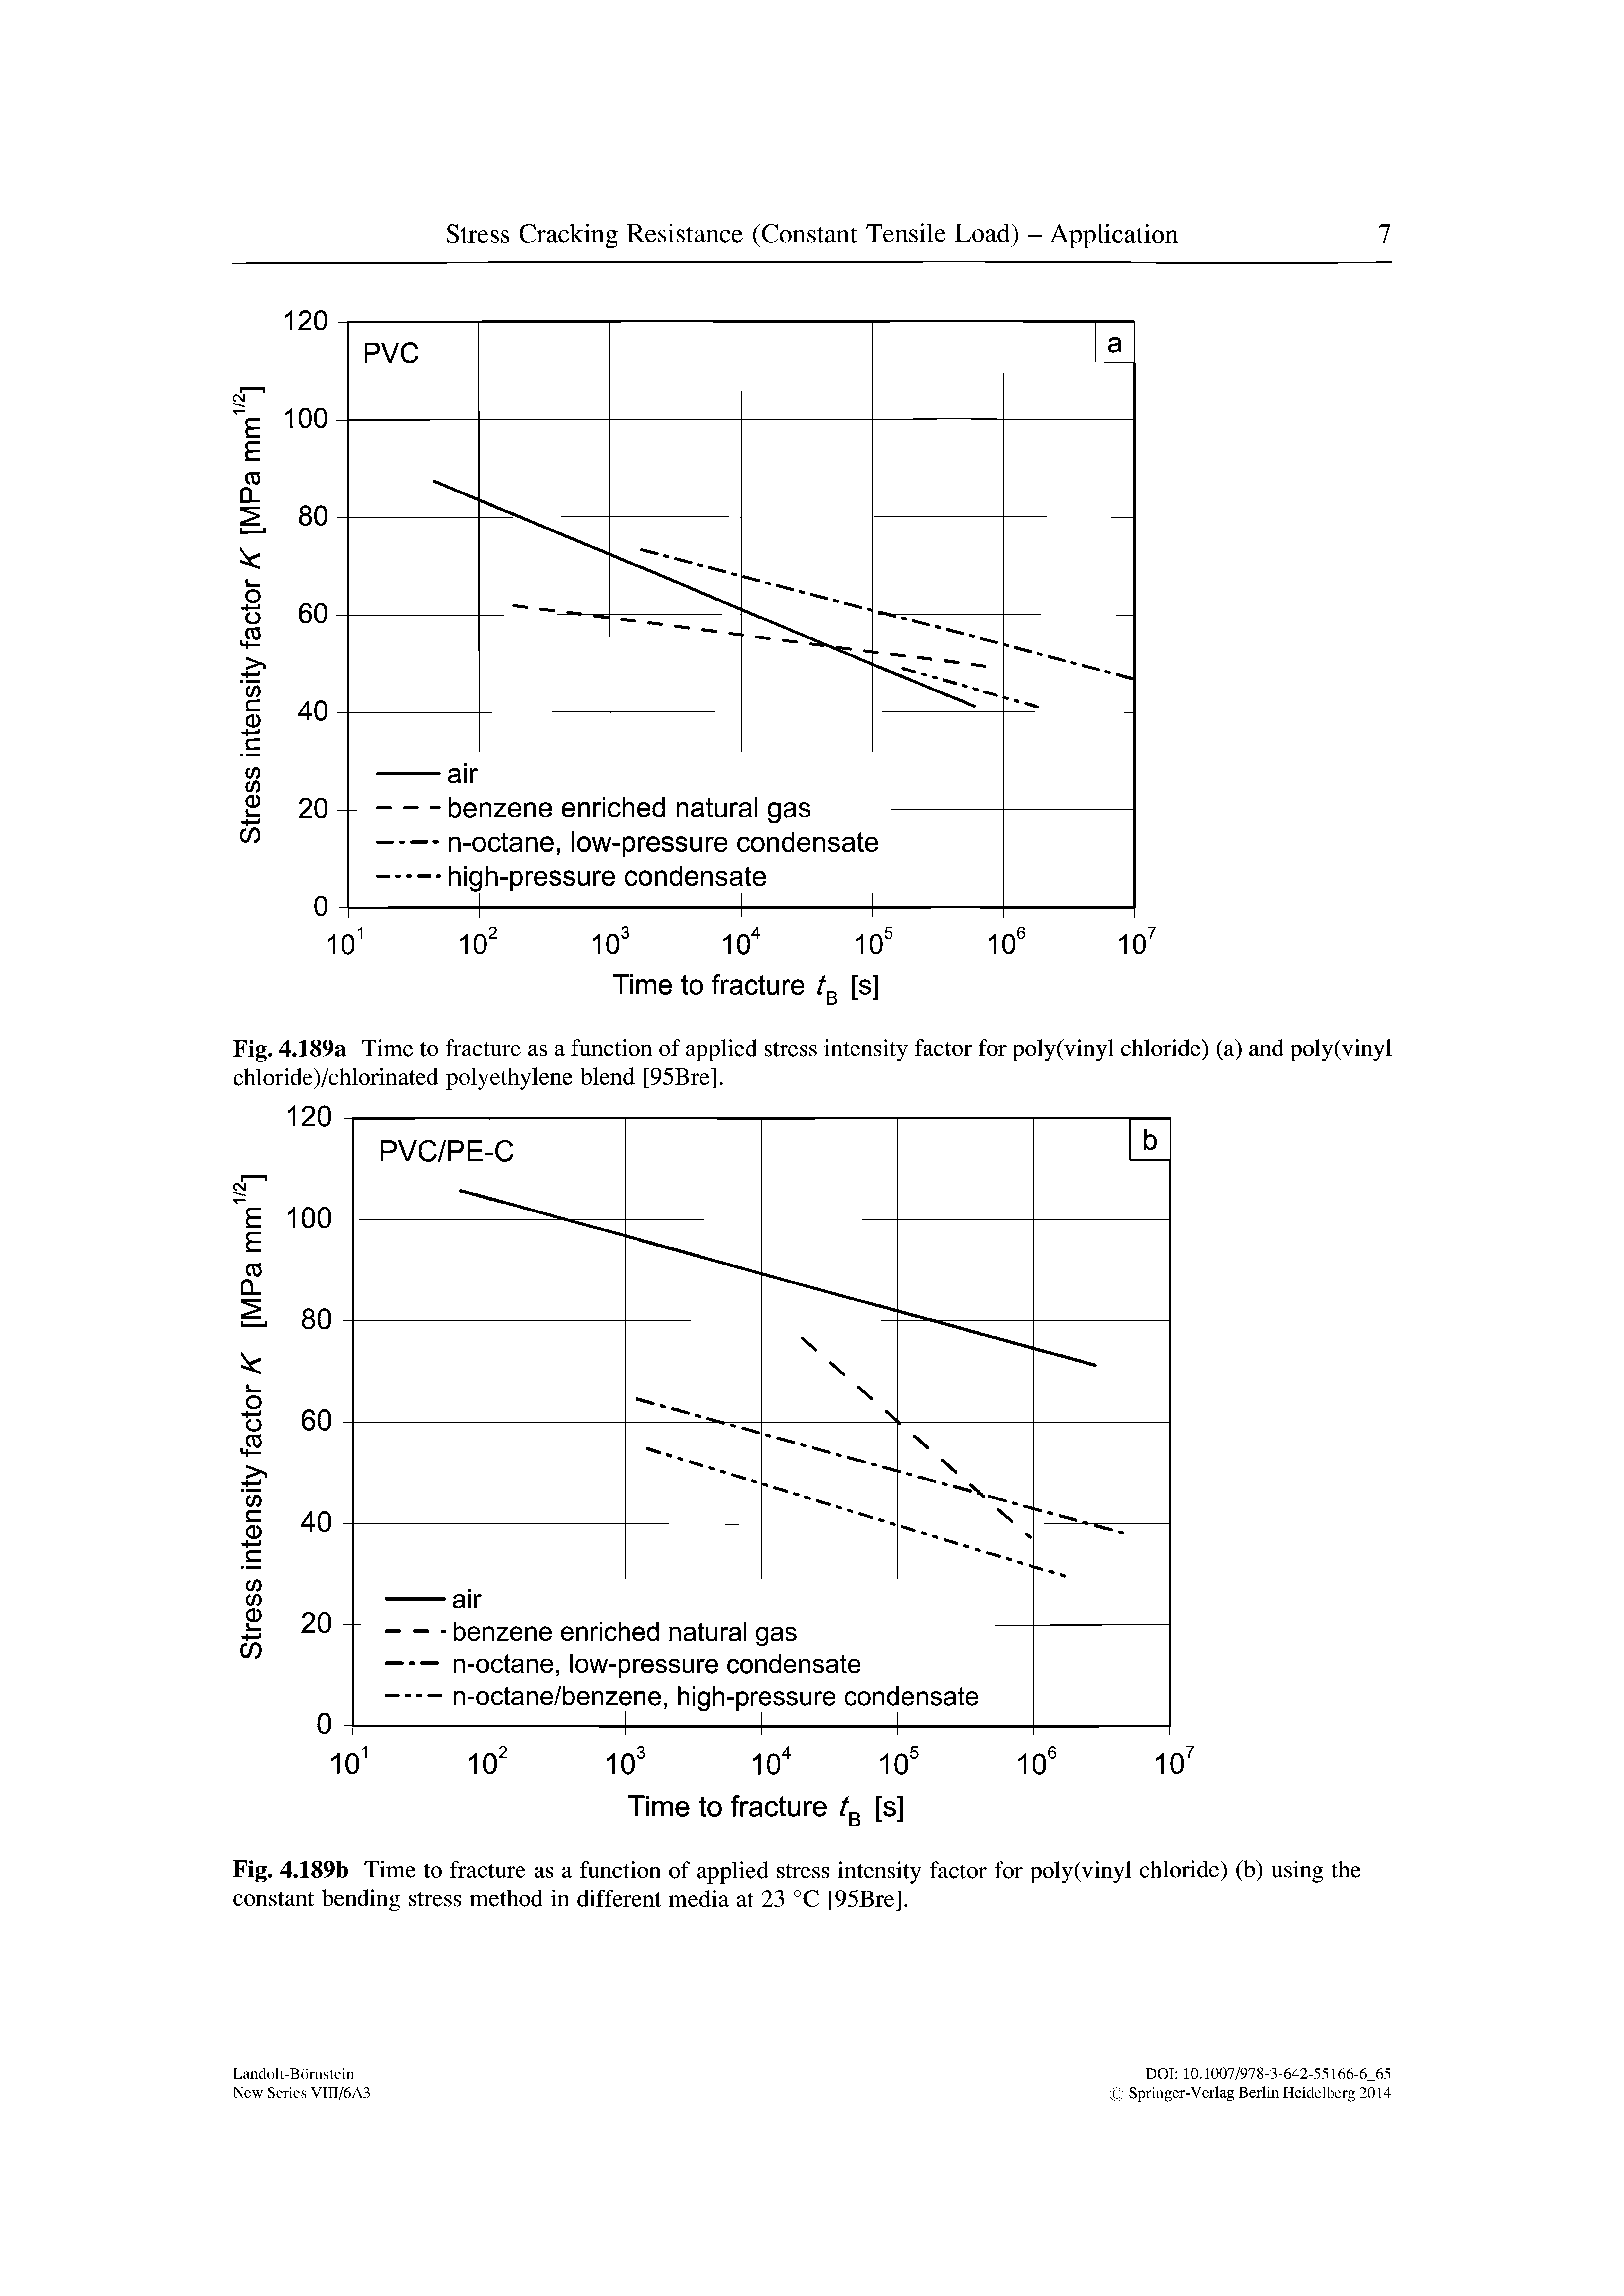 Fig. 4.189a Time to fracture as a function of applied stress intensity factor for poly(vinyl chloride) (a) and poly(vinyl chloride)/chlorinated polyethylene blend [95Bre].